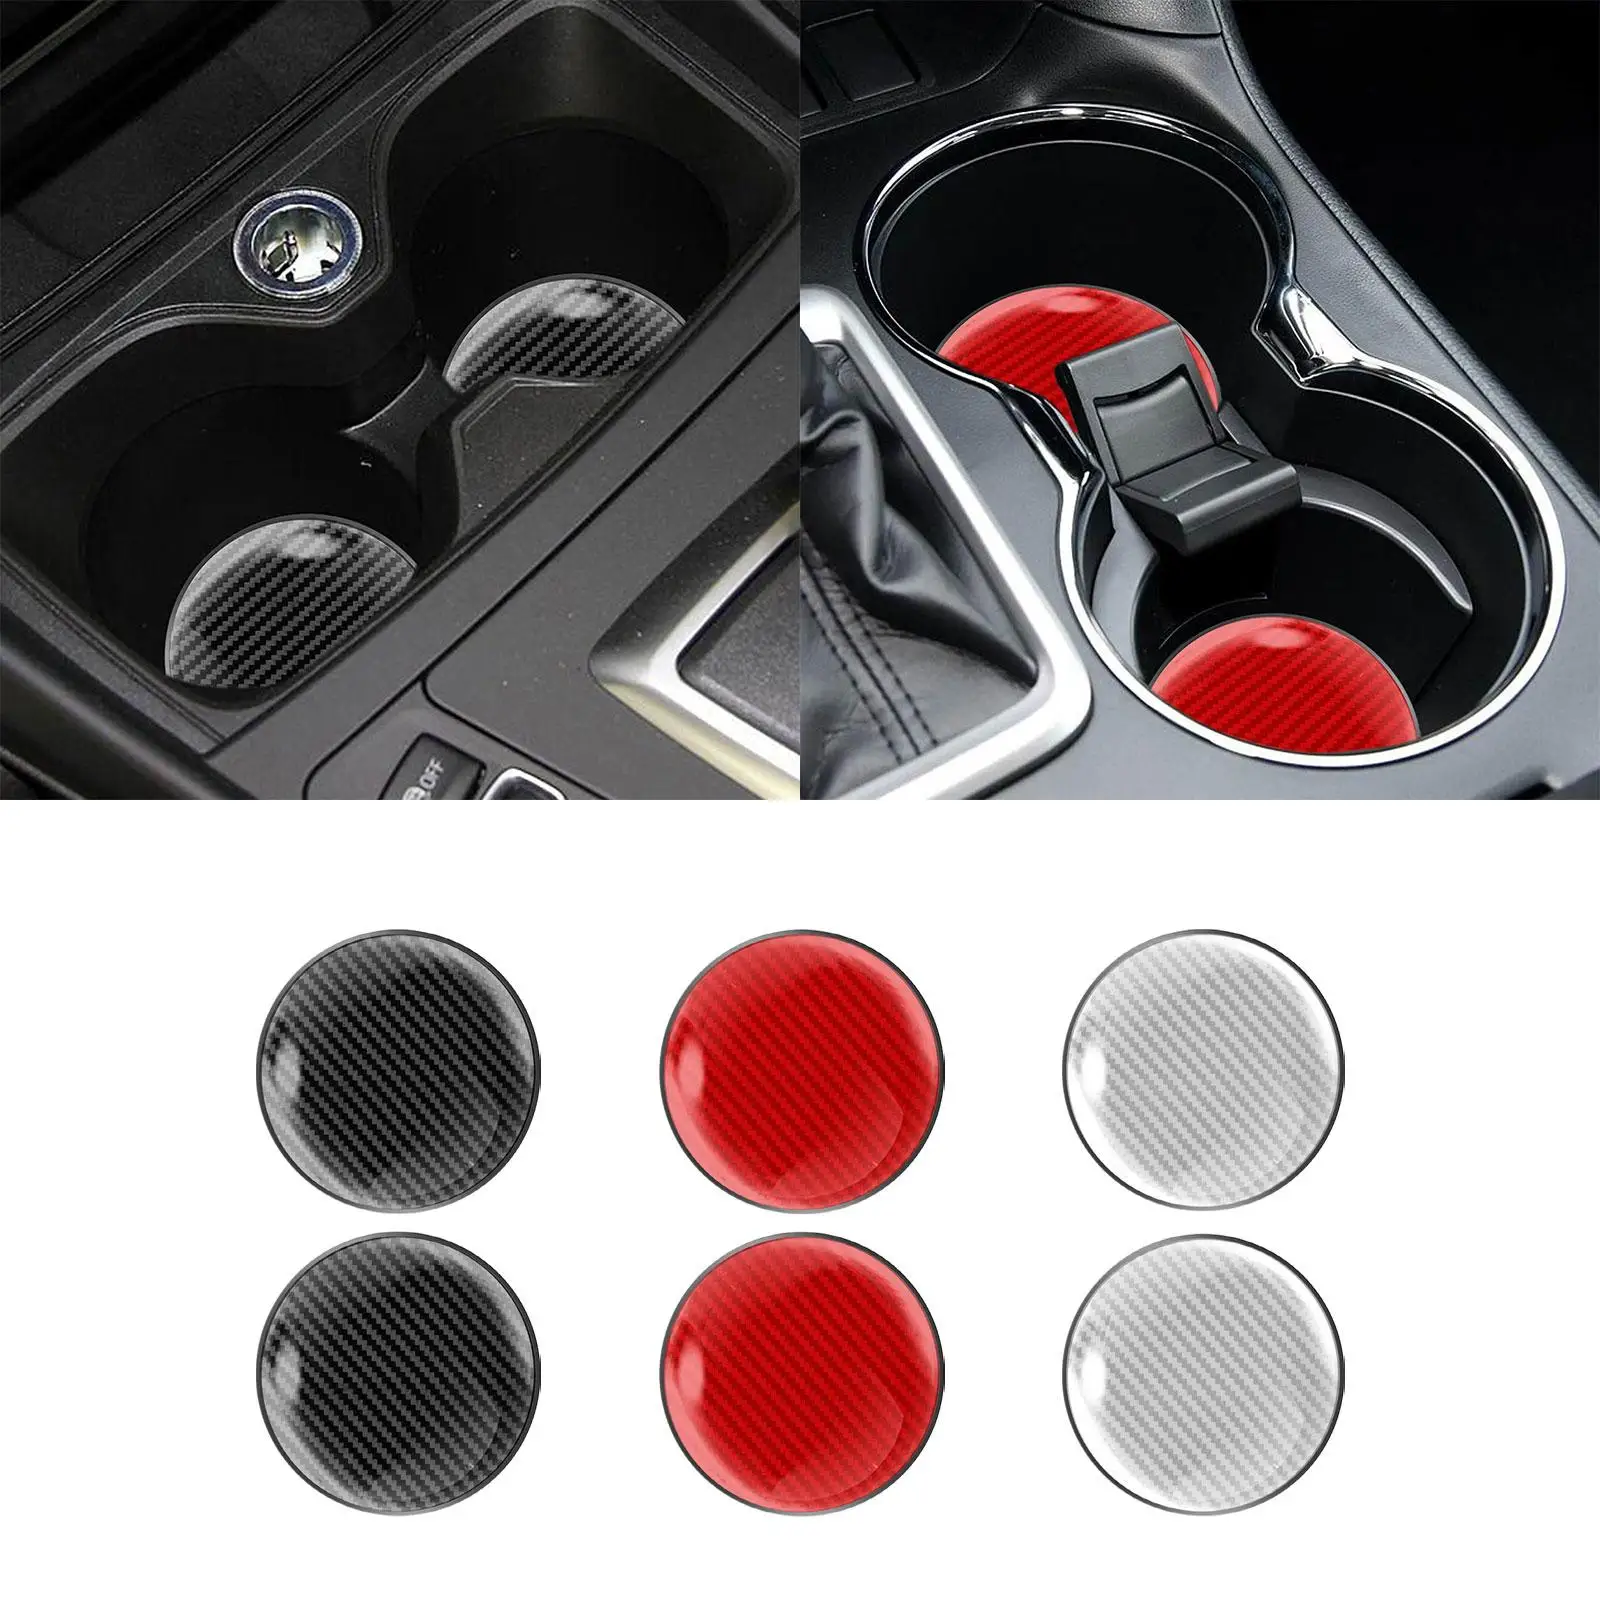 2Pcs Cup Holder Coaster Anti Slip Auto Interior Accessory Vehicle Car Coasters Insert Cup Holder Insert Coaster for Outdoor